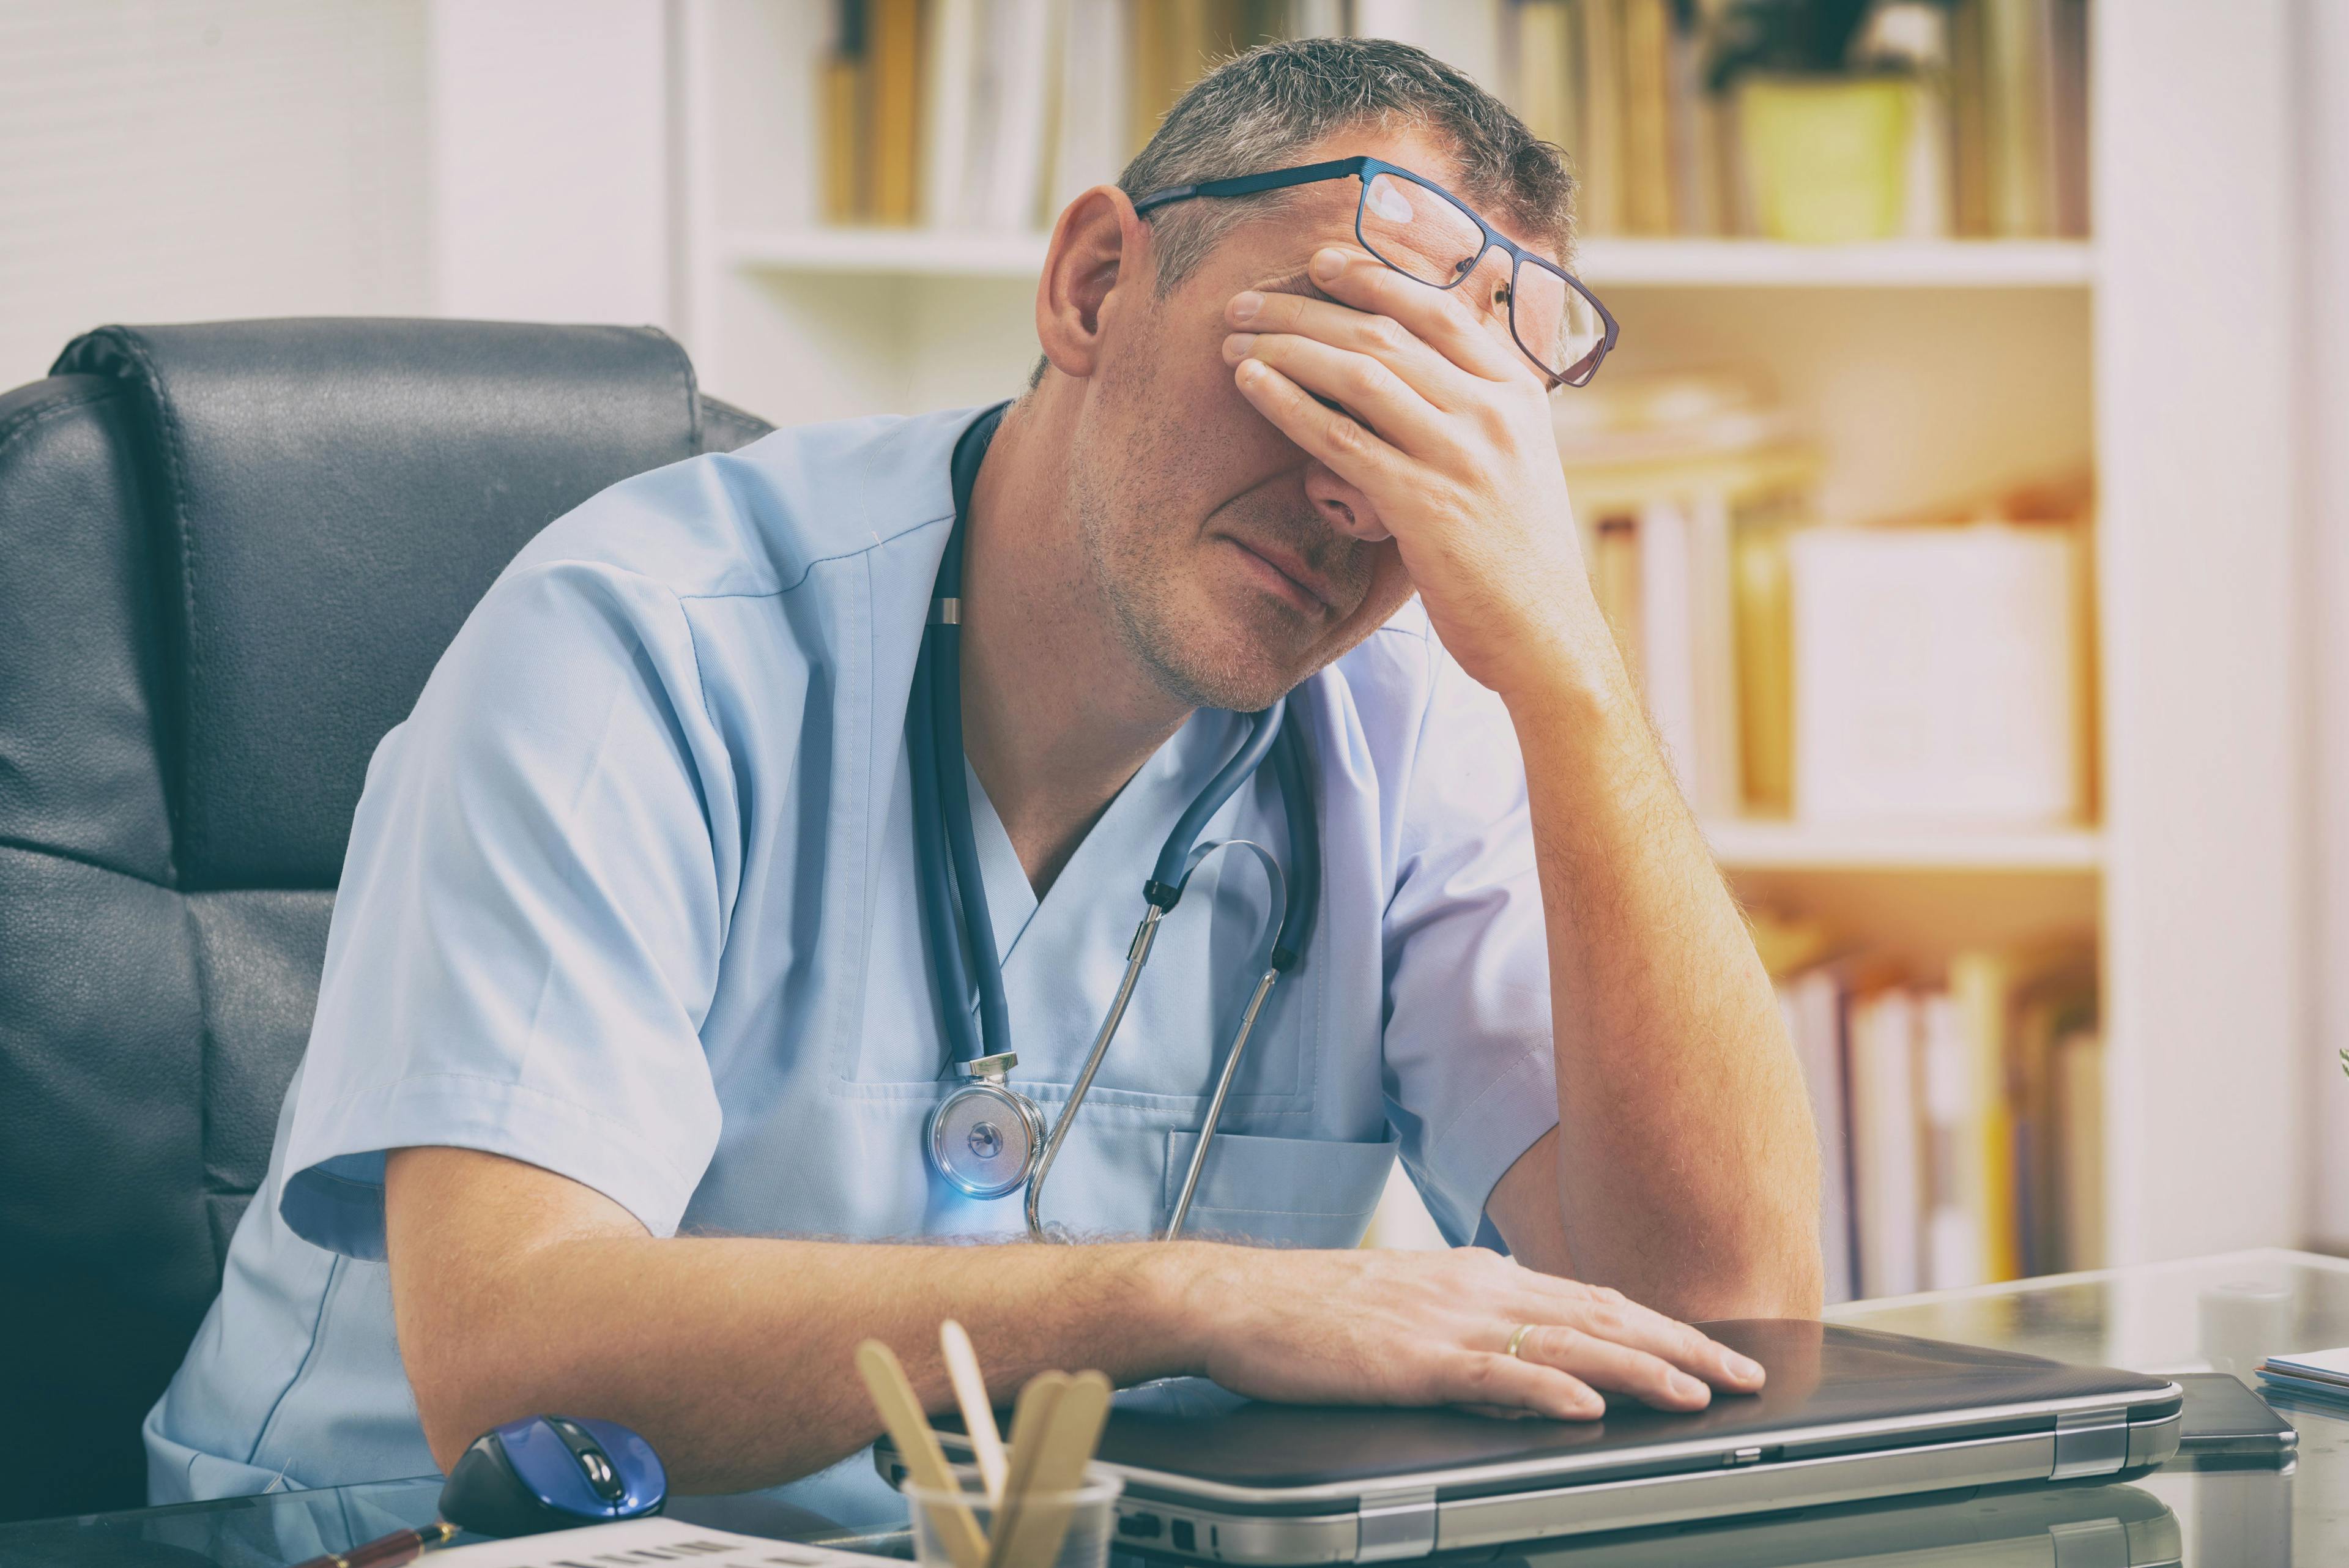 Sleep-related impairment prevalent in physicians